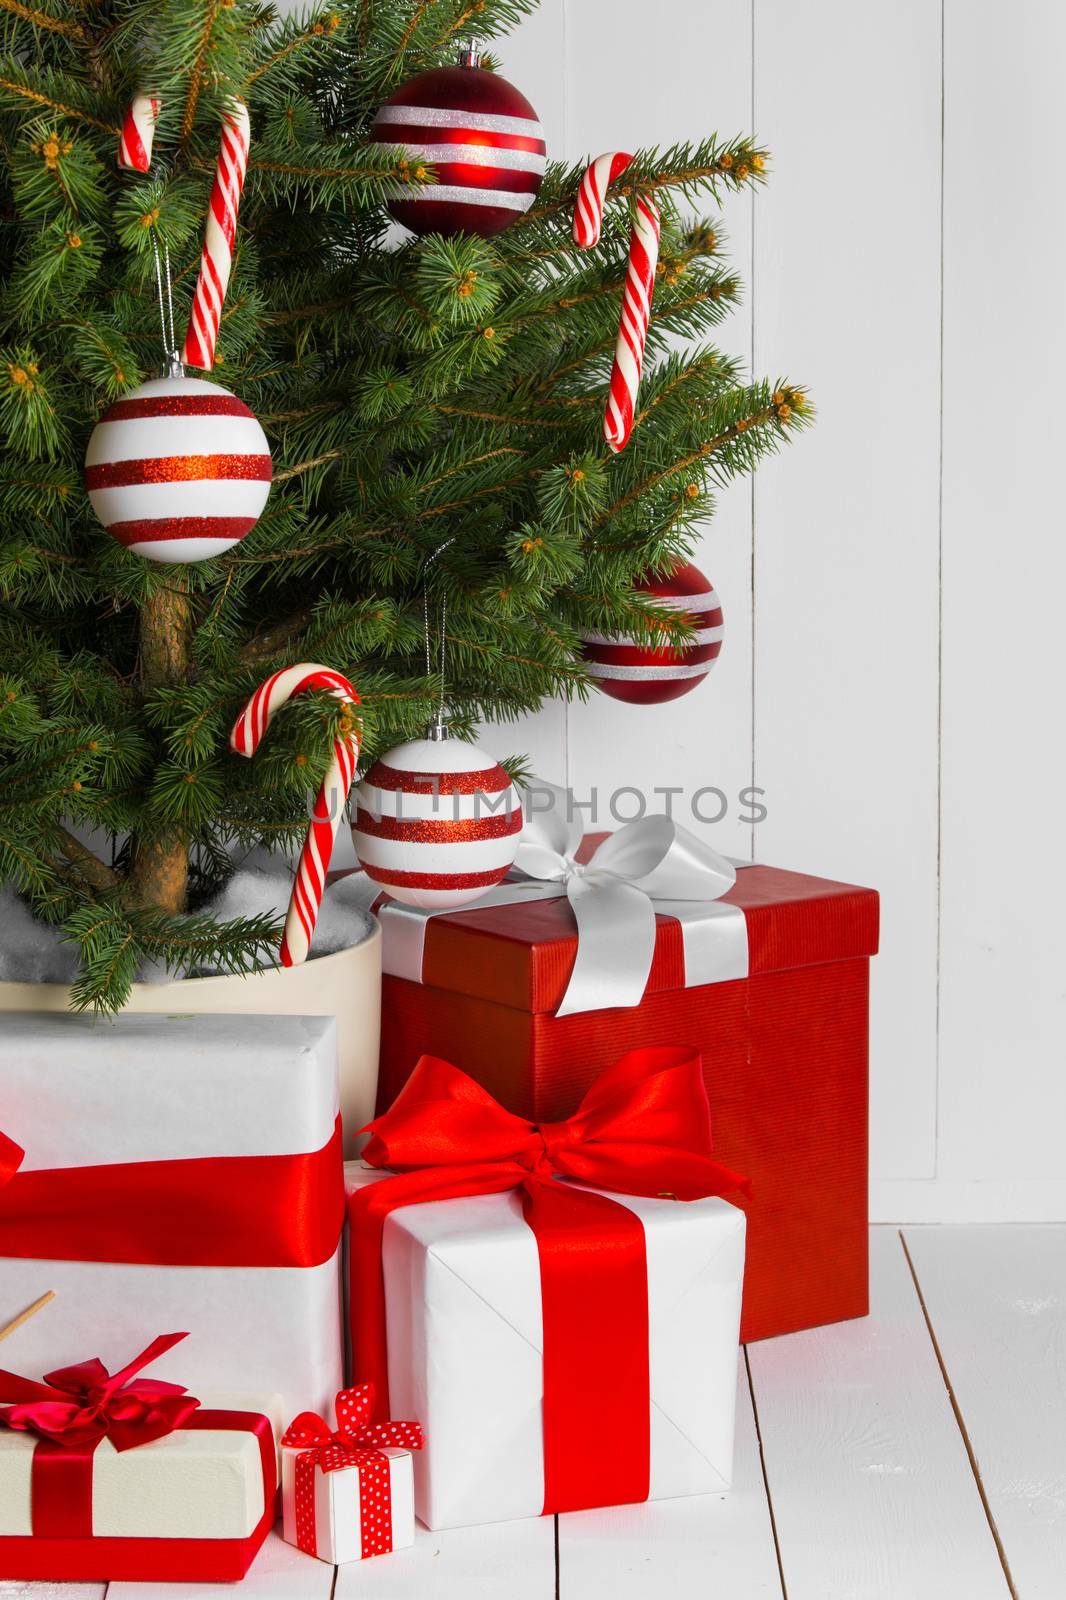 Merry christmas card with decorated christmas tree and gifts